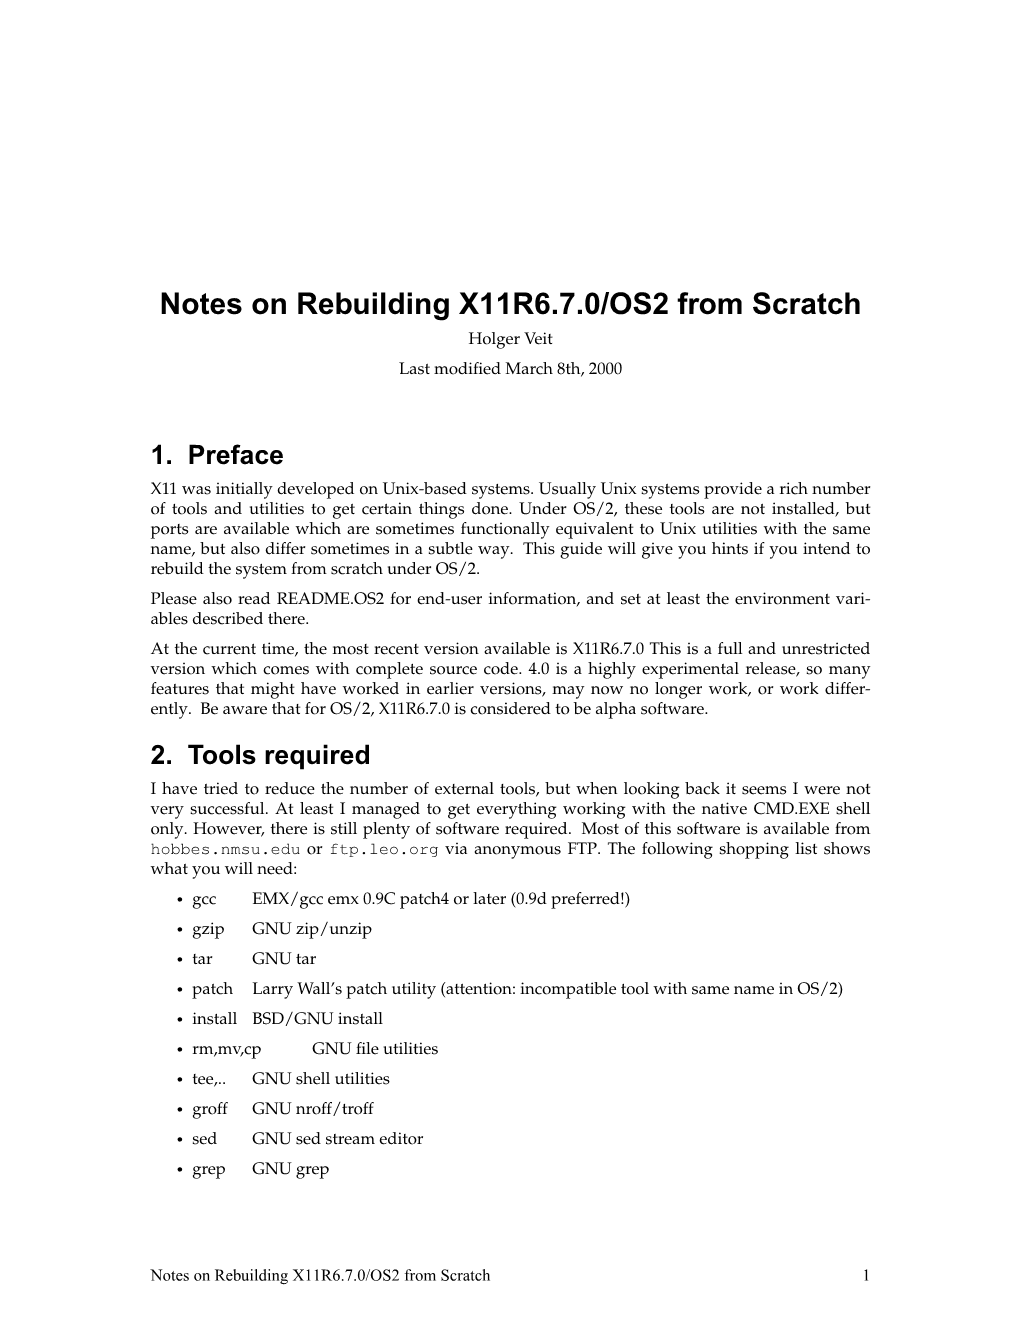 Notes on Rebuilding X11R6.7.0/OS2 from Scratch Holger Veit Last Modiﬁed March 8Th, 2000